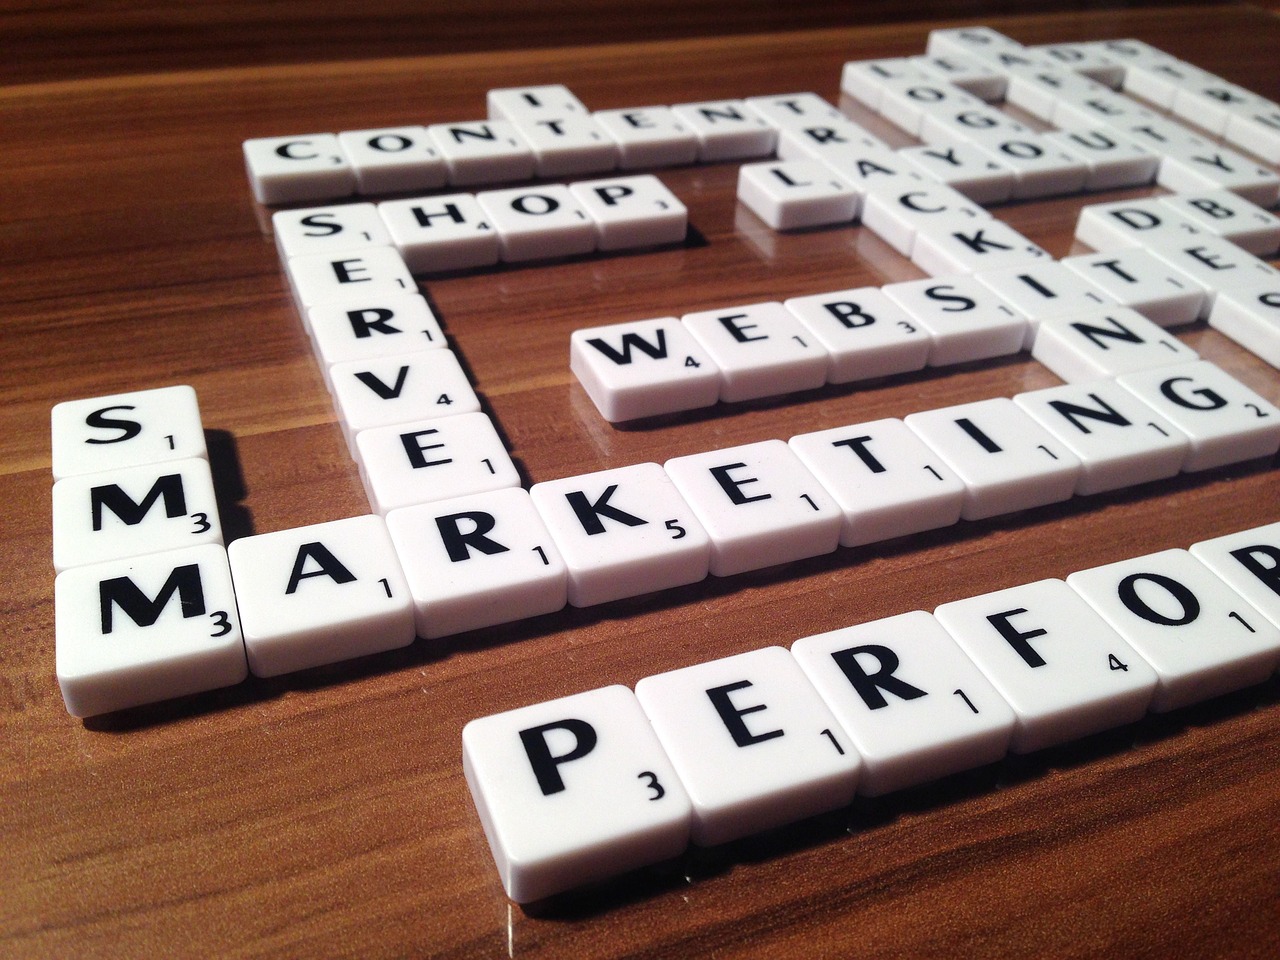 Scrabble letters spelling out words such as marketing, shop, website, etc.